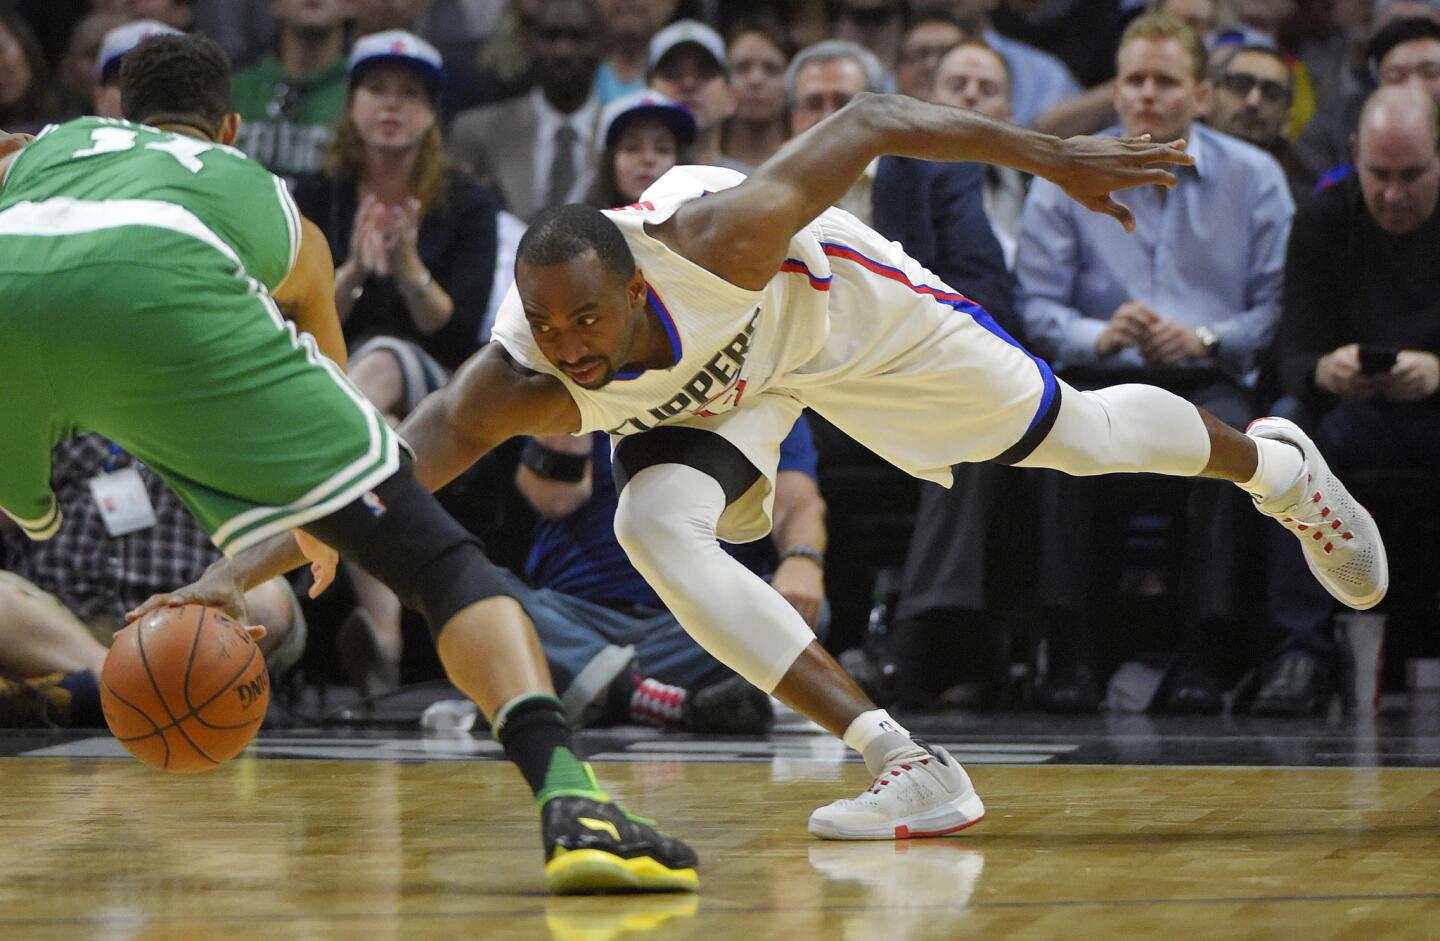 Clippers forward Luc Richard Mbah a Moute reaches for a loose ball along with Celtics guard Evan Turner during the first half.